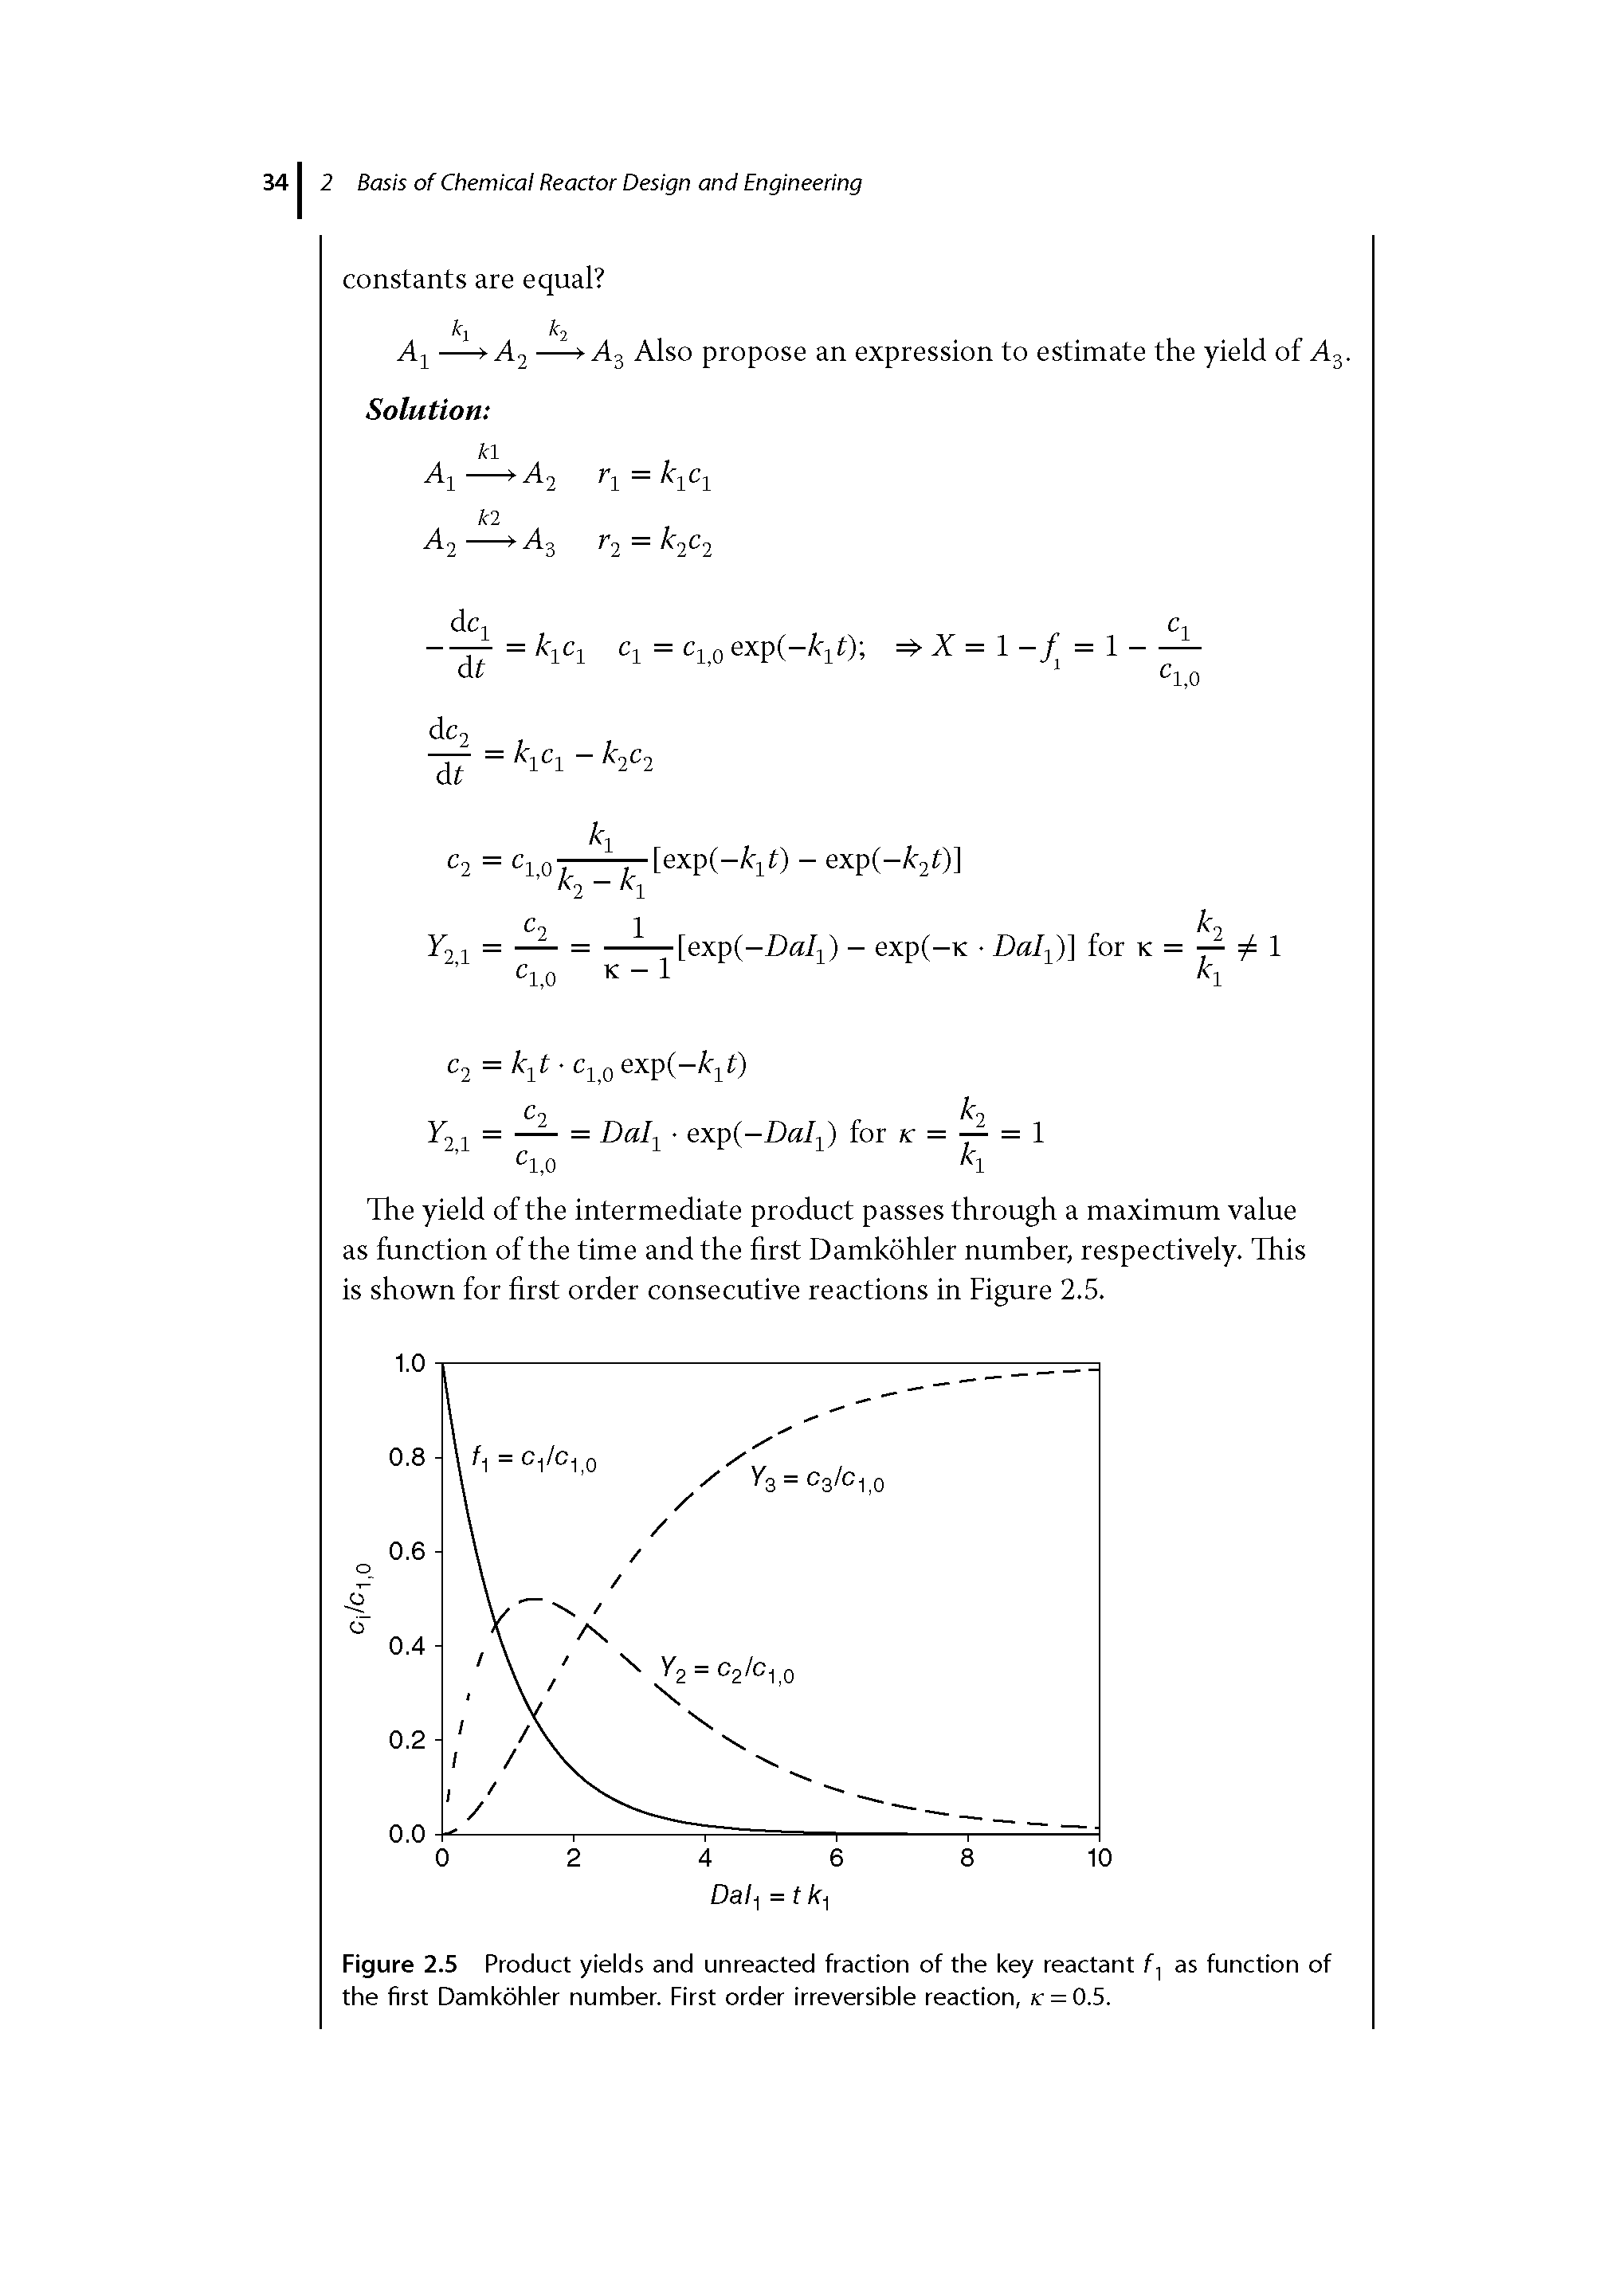 Figure 2.5 Product yields and unreacted fraction of the key reactant f, as function of the first Damkohler number. First order irreversible reaction, v = 0.5.